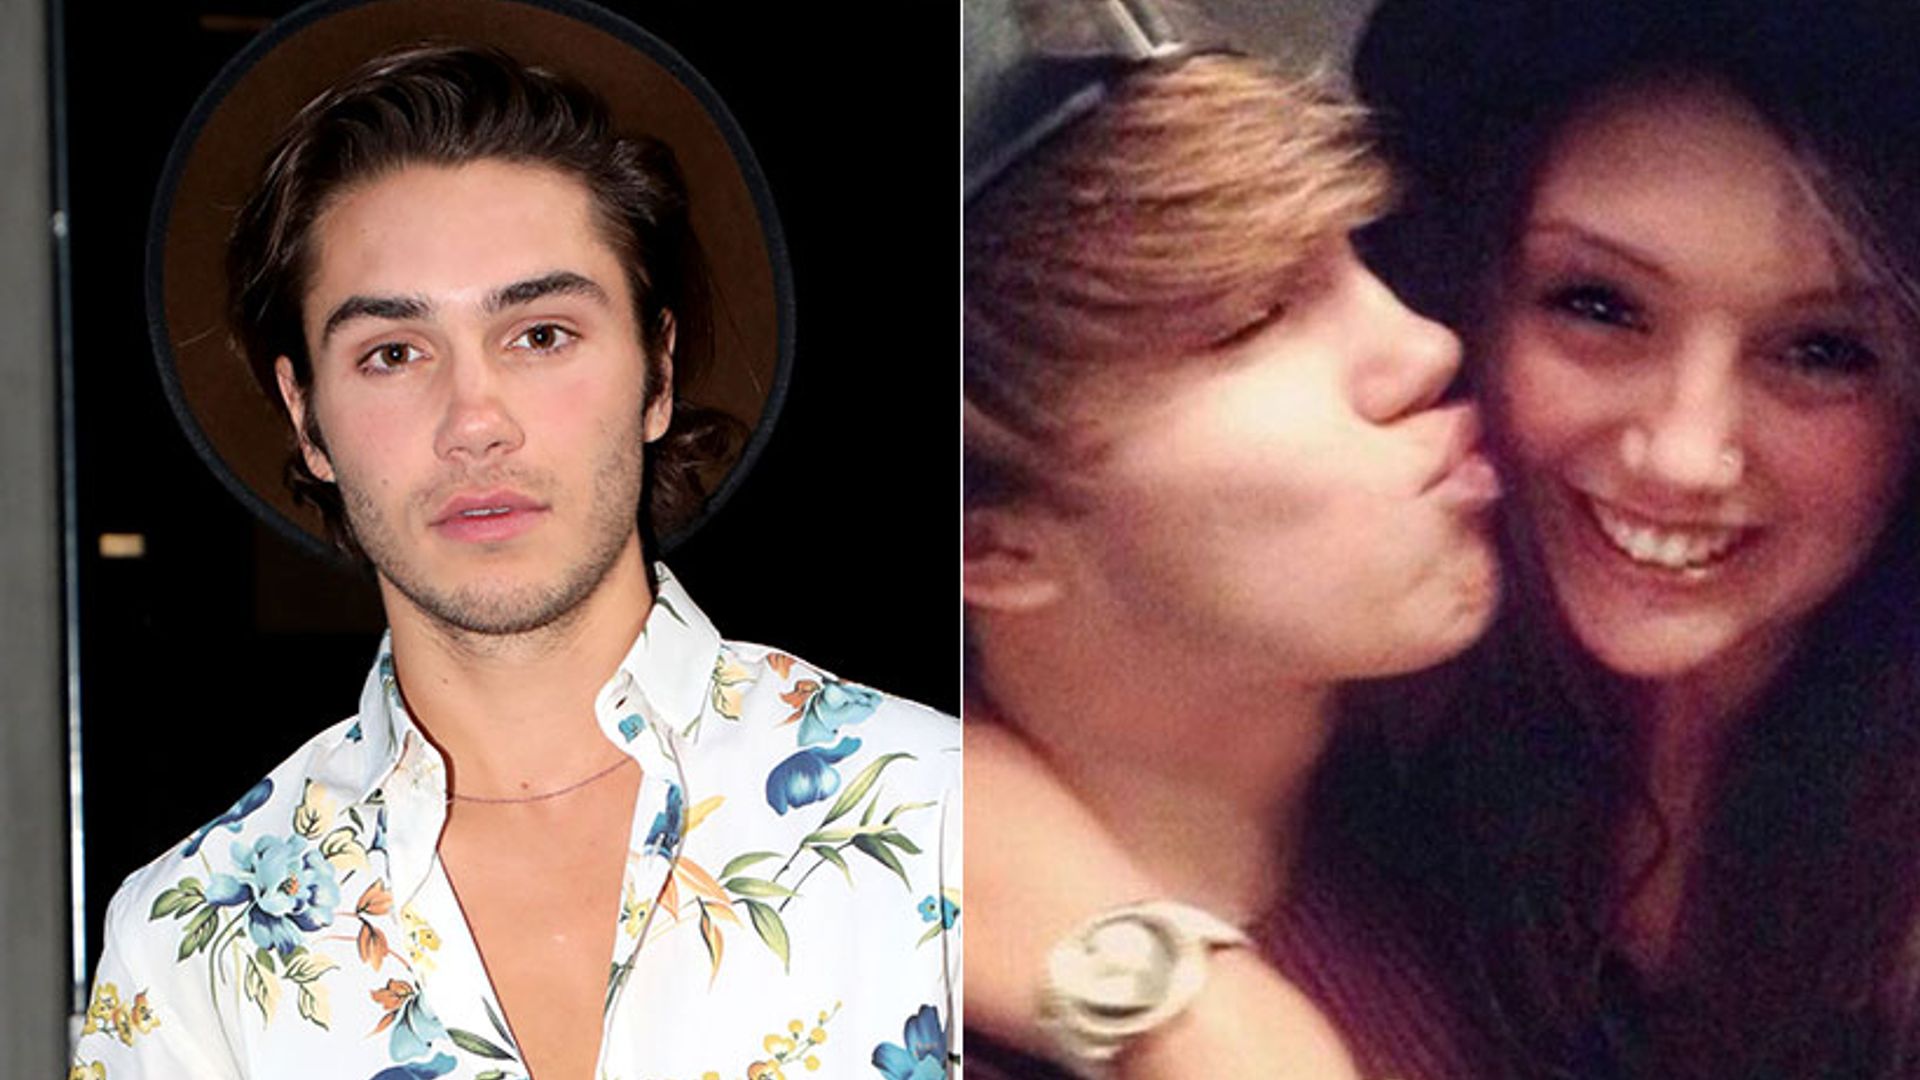 George Shelley praises 'supportive' boyfriend as he breaks his silence over sister's death